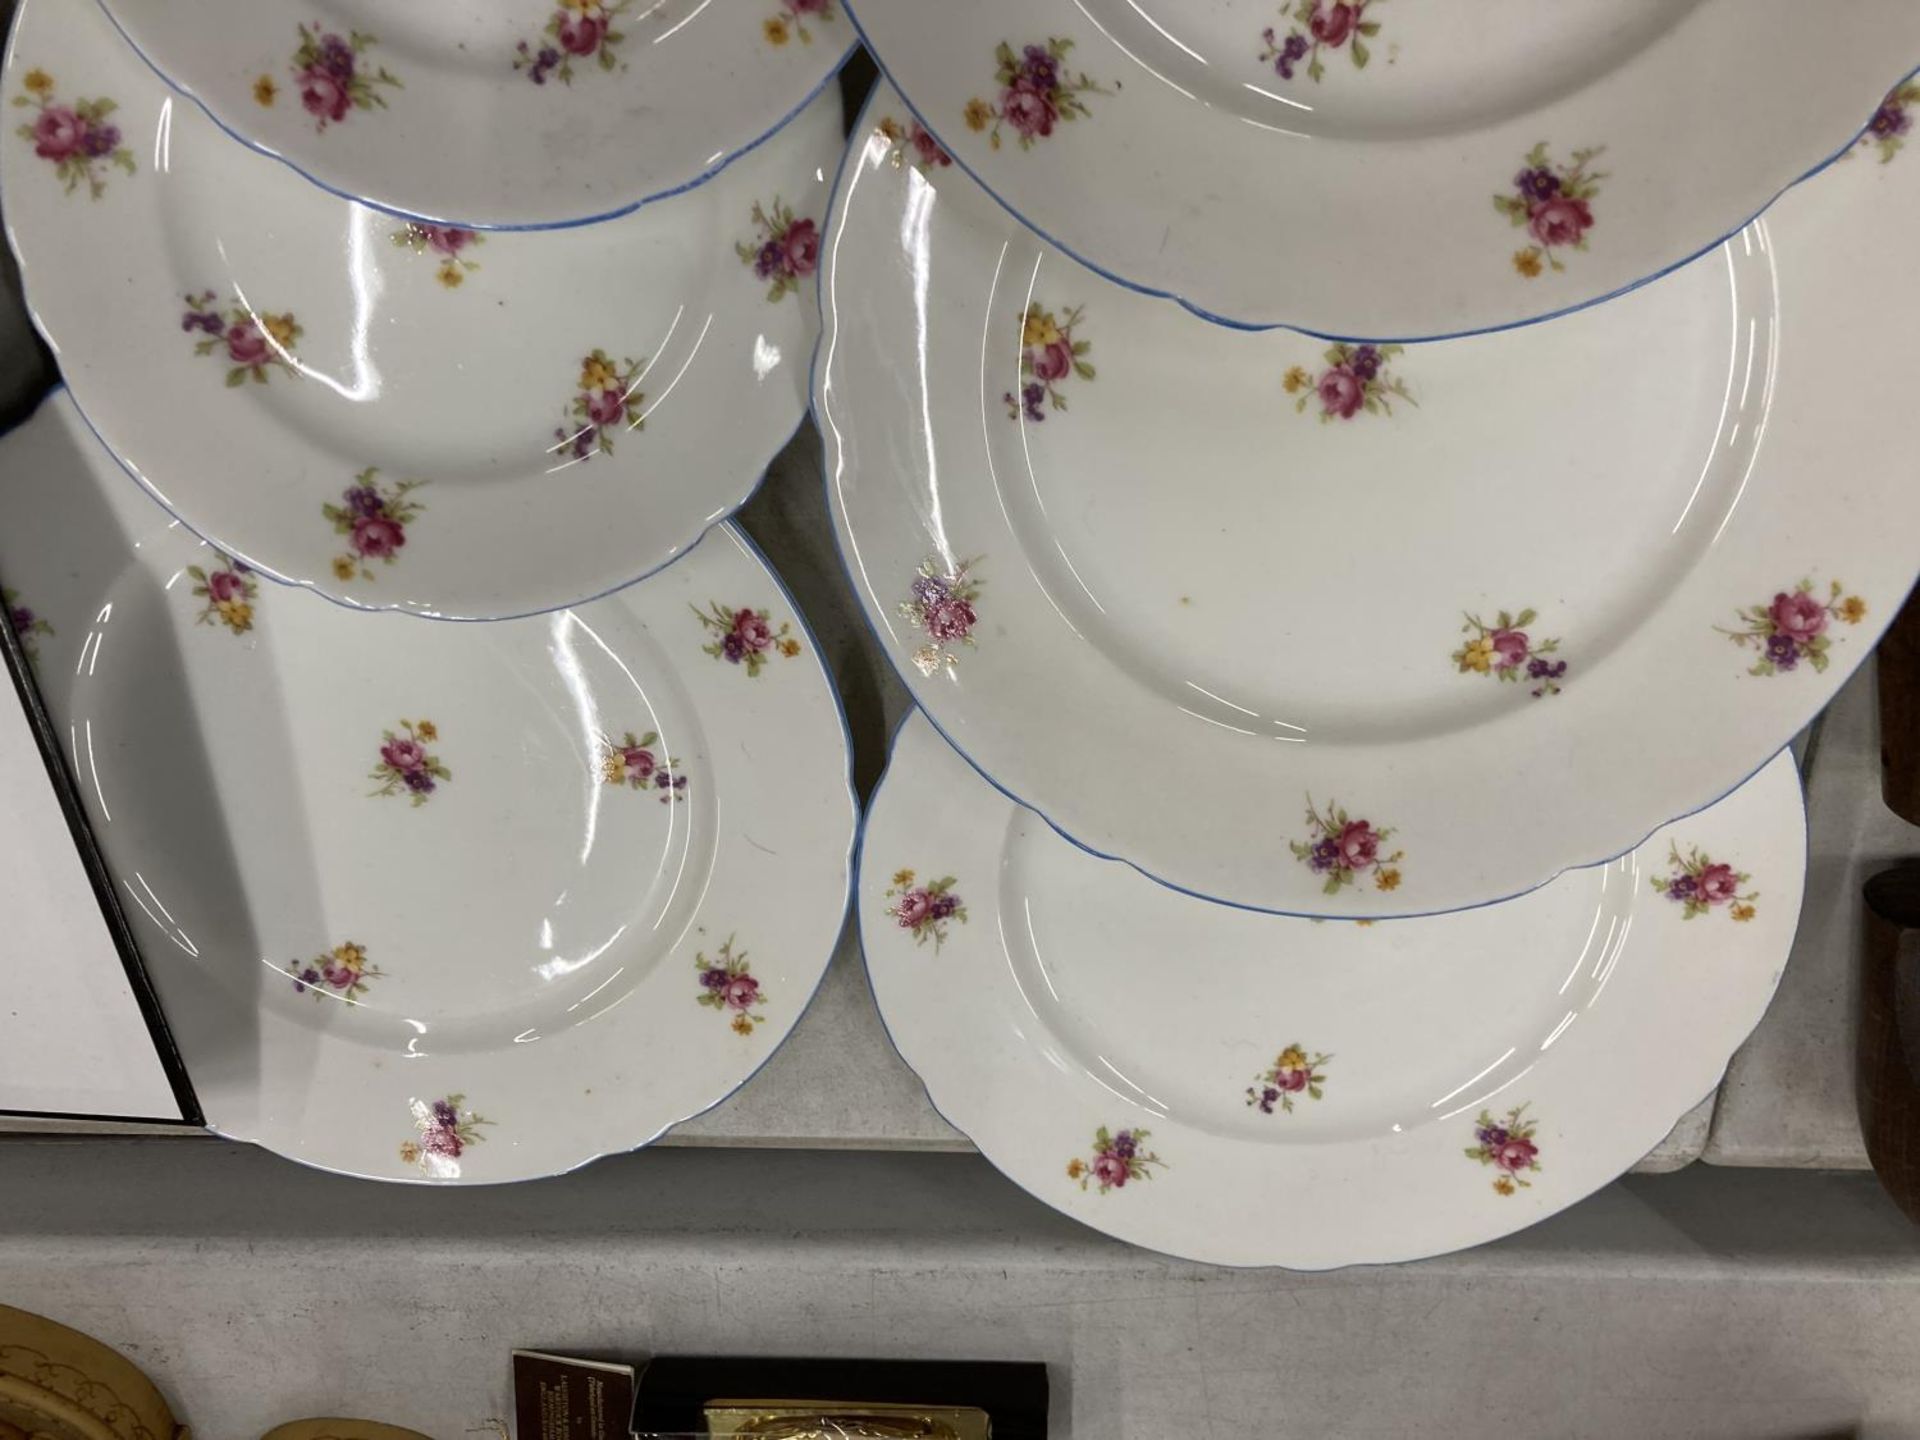 A QUANTITY OF SHELLEY CHINA PLATES WITH A DELICATE FLORAL PATTERN - 12 IN TOTAL - Image 3 of 3